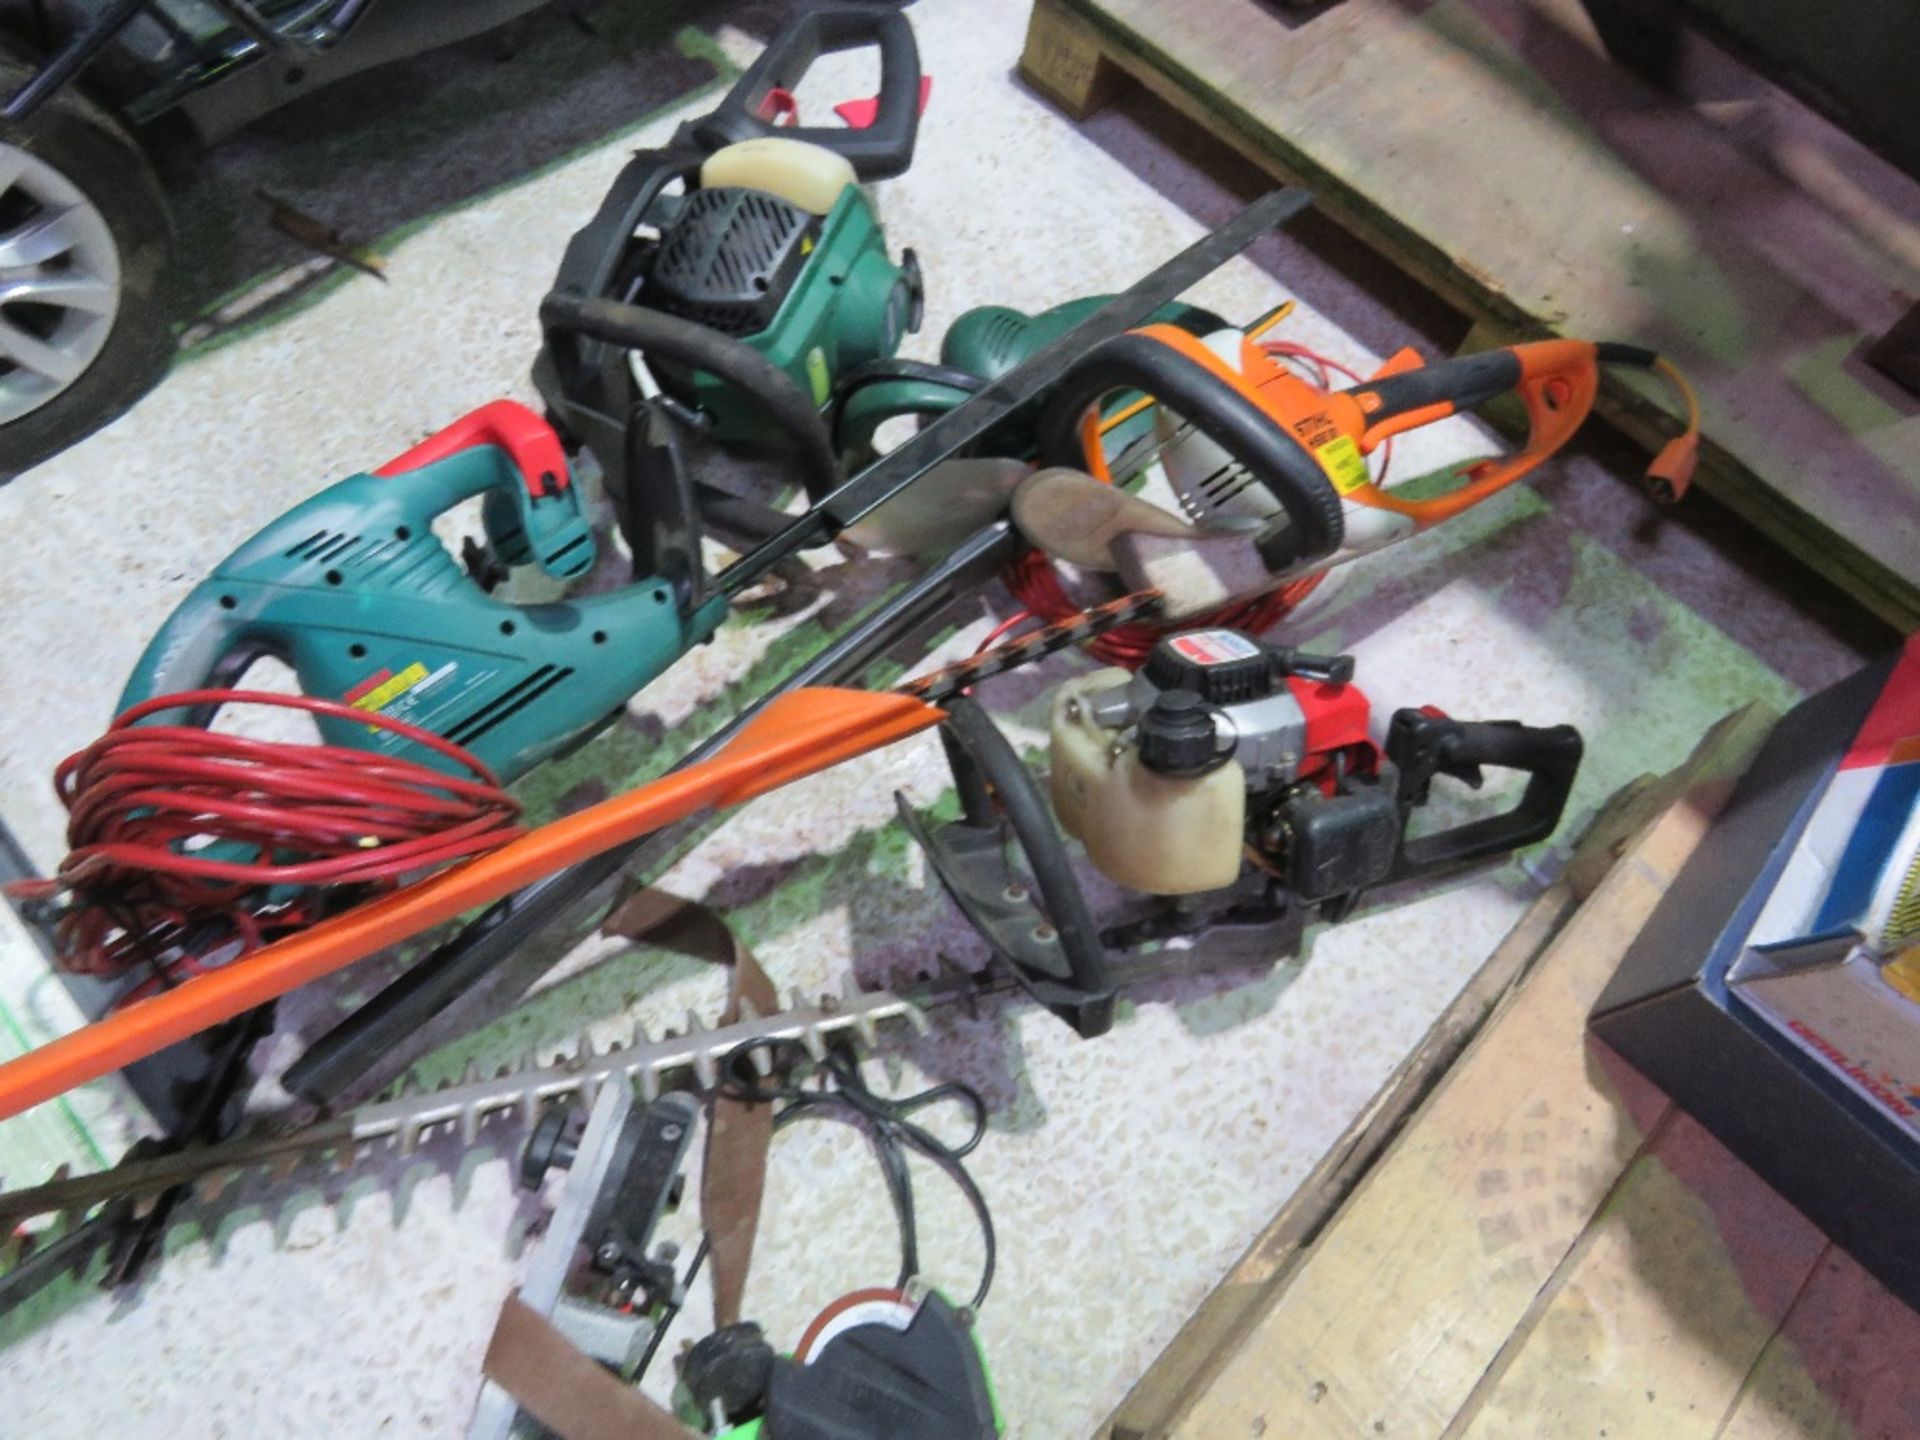 2 X PETROL HEDGE CUTTERS PLUS 2 X ELECTRIC HEDGE CUTTERS AND A CHAINSAW SHARPENER. - Image 14 of 14